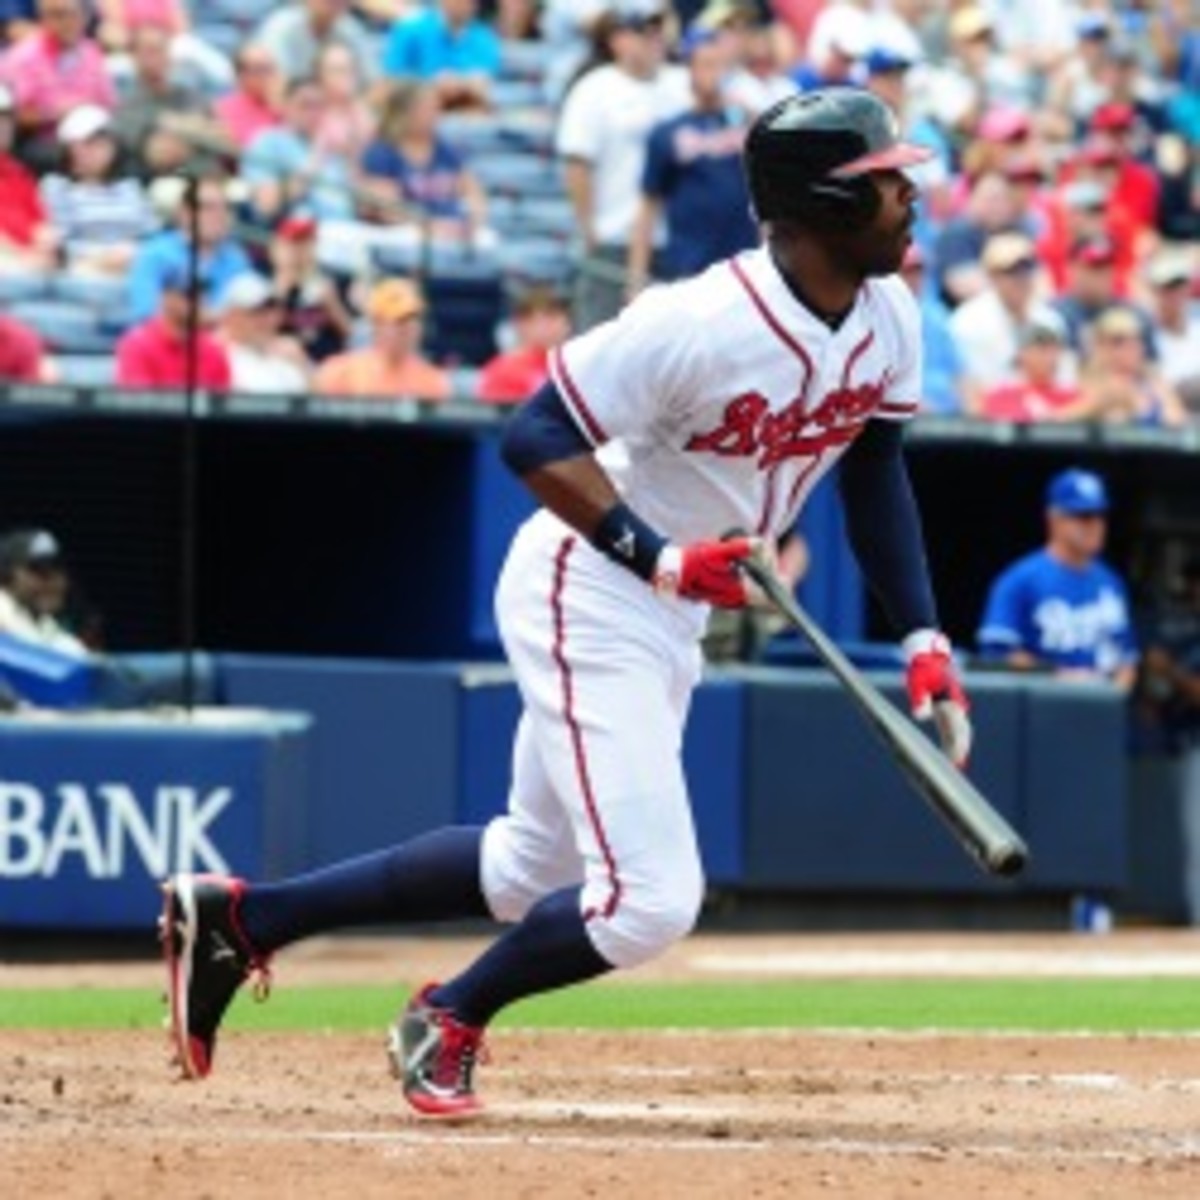 Braves outfielder Jason Heyward says he hopes to return at the end of May. (Scott Cunningham/Getty Images)